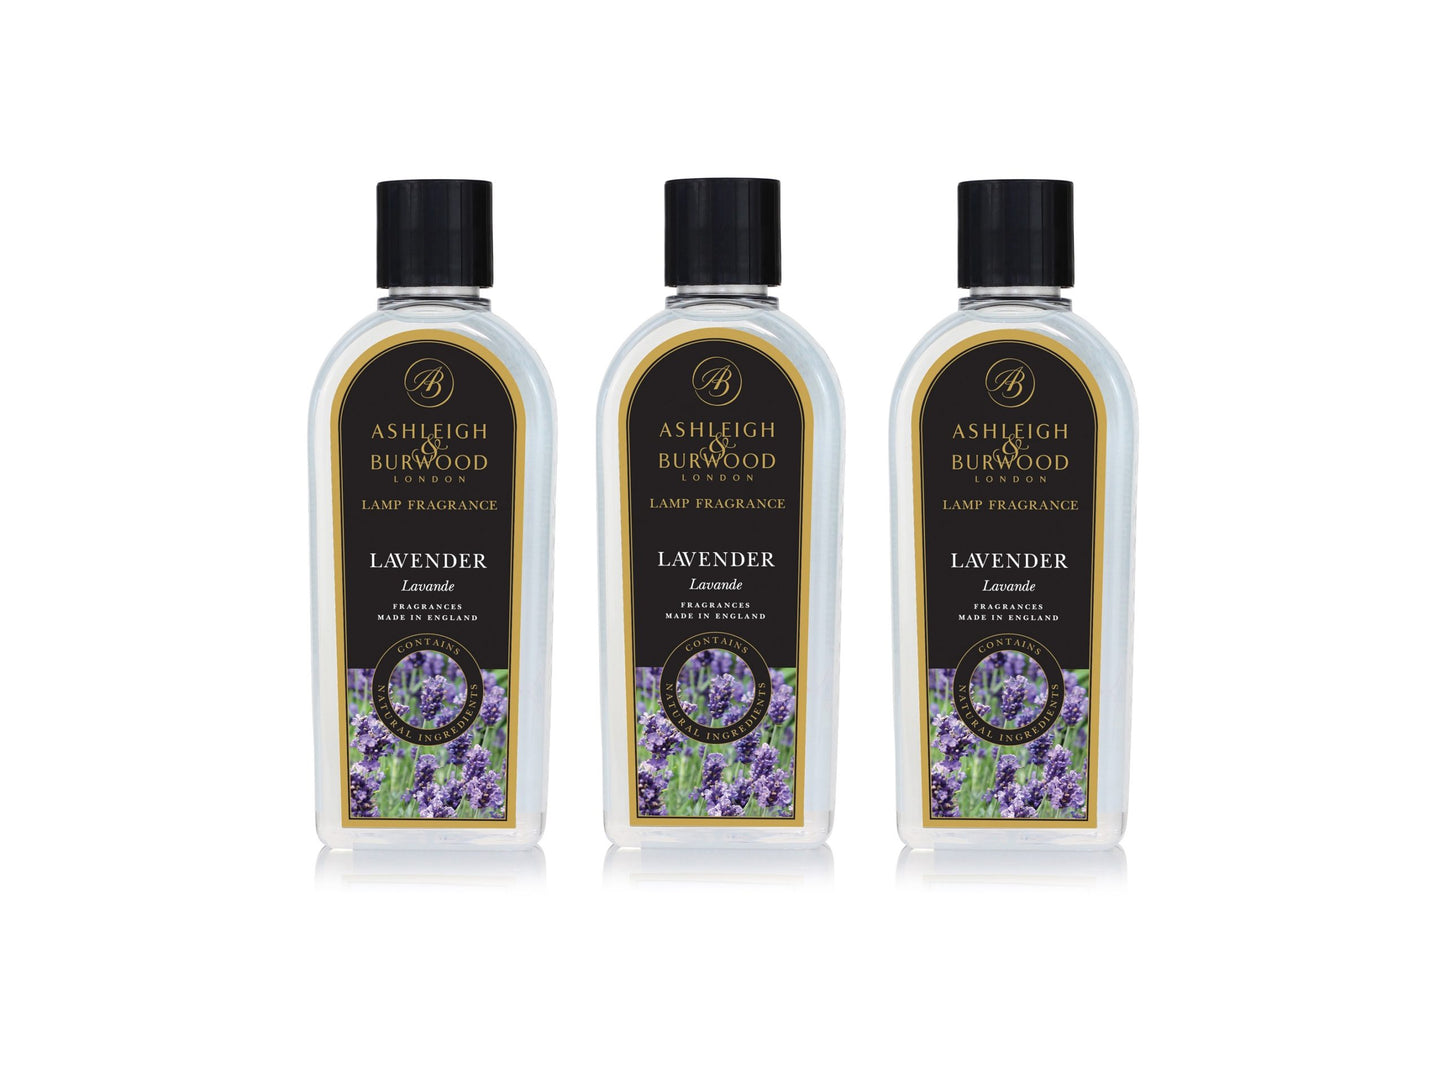 Three bottles of lavender lamp liquid in clear bottles with black caps and labels